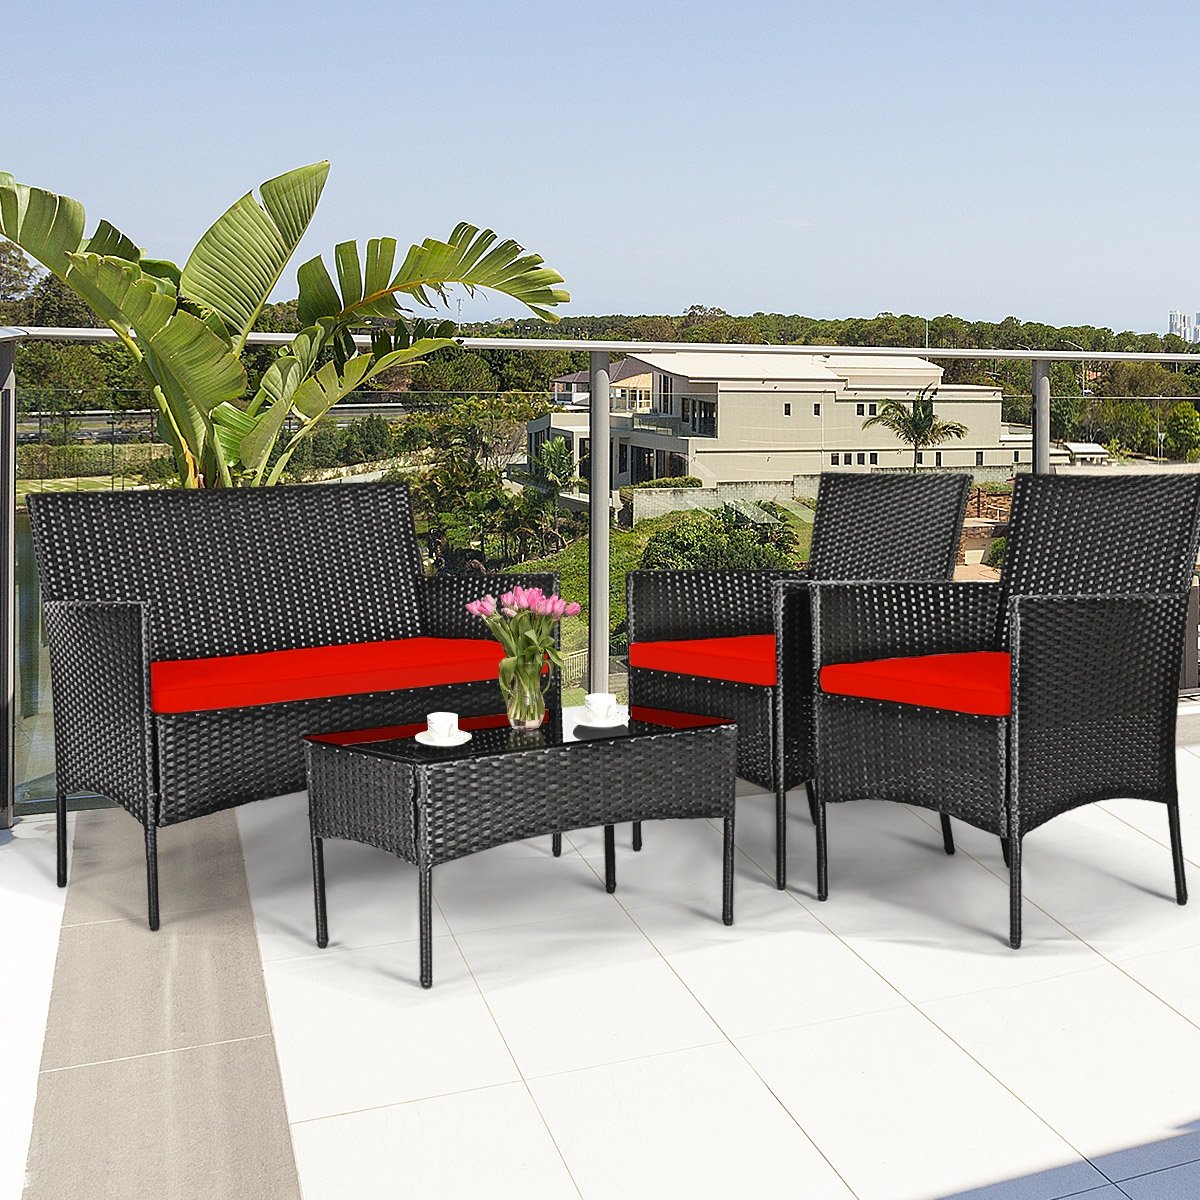 4 Pcs Patio Rattan Cushioned Sofa Furniture Set with Tempered Glass Coffee Table, Red - Gallery Canada